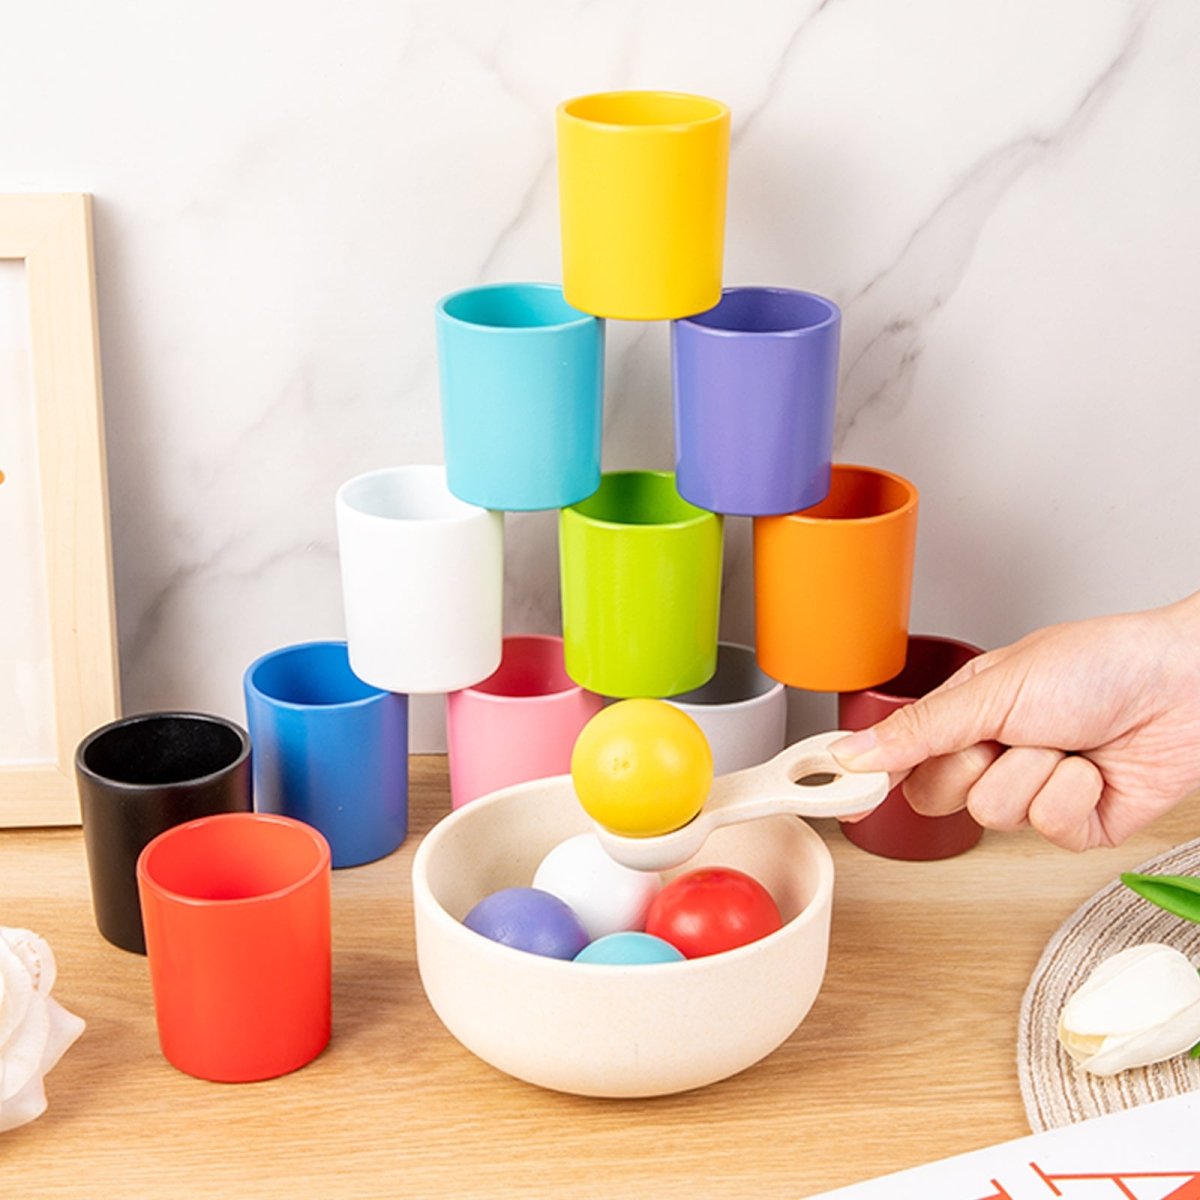 Ball and Cup Color Sorter - Ball and Cup Color Sorter - Curious Melodies